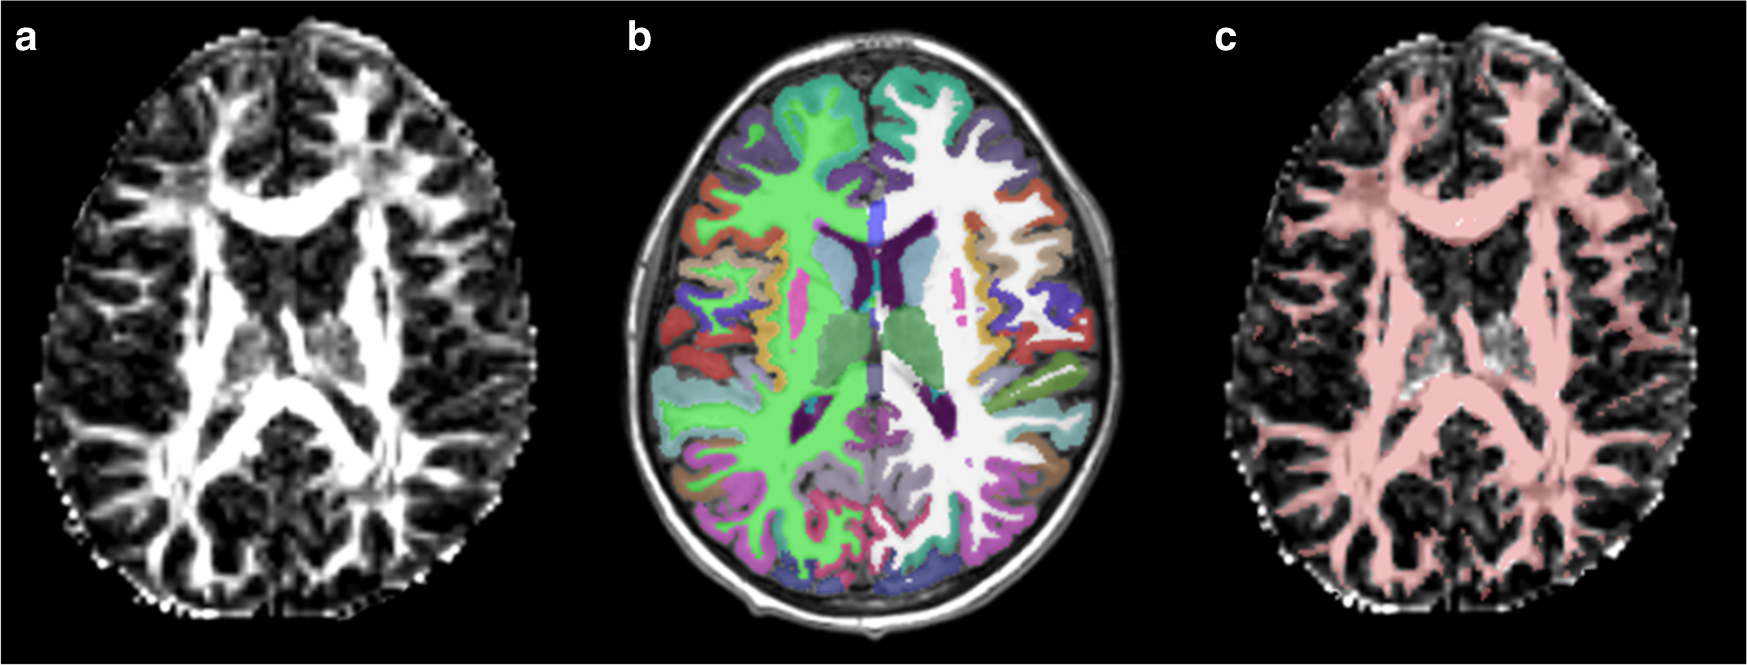 Hematopoietic stem cell transplantation reverses white matter injury  measured by diffusion-tensor imaging (DTI) in sickle cell disease patients  | Bone Marrow Transplantation